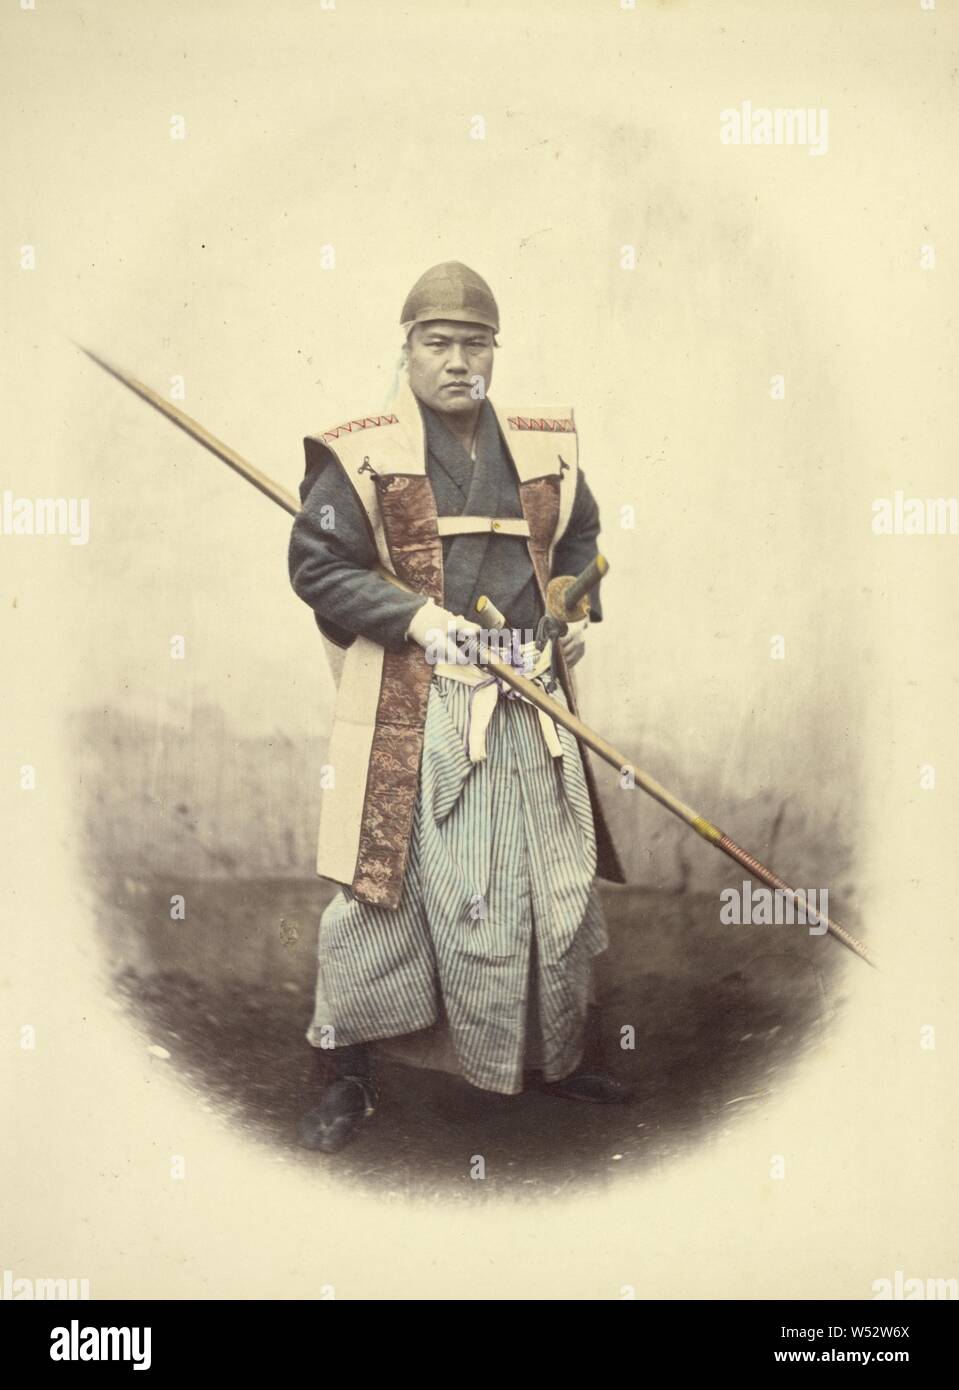 Spear Men Or Lancers Felice Beato English Born Italy 12 1909 Japan 1866 1867 Hand Colored Albumen Silver Print 28 1 X 21 Cm 11 1 16 X 8 1 4 In Stock Photo Alamy